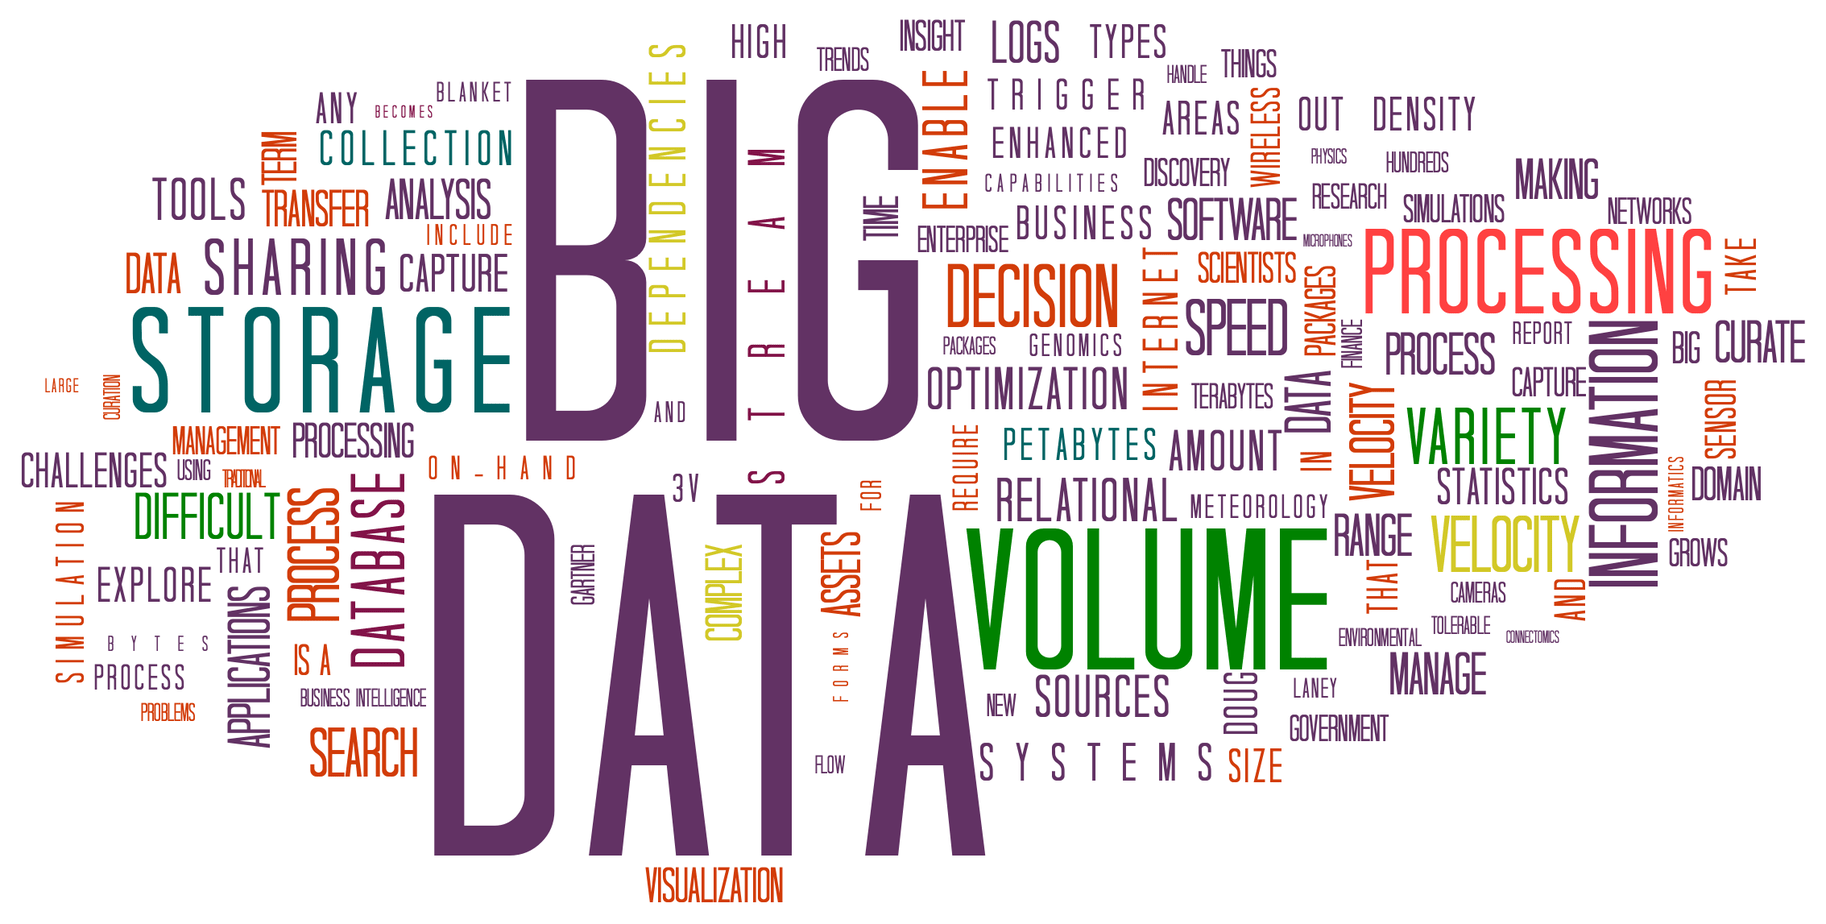 What Is Big Data and Why Should You Care About It? - 6